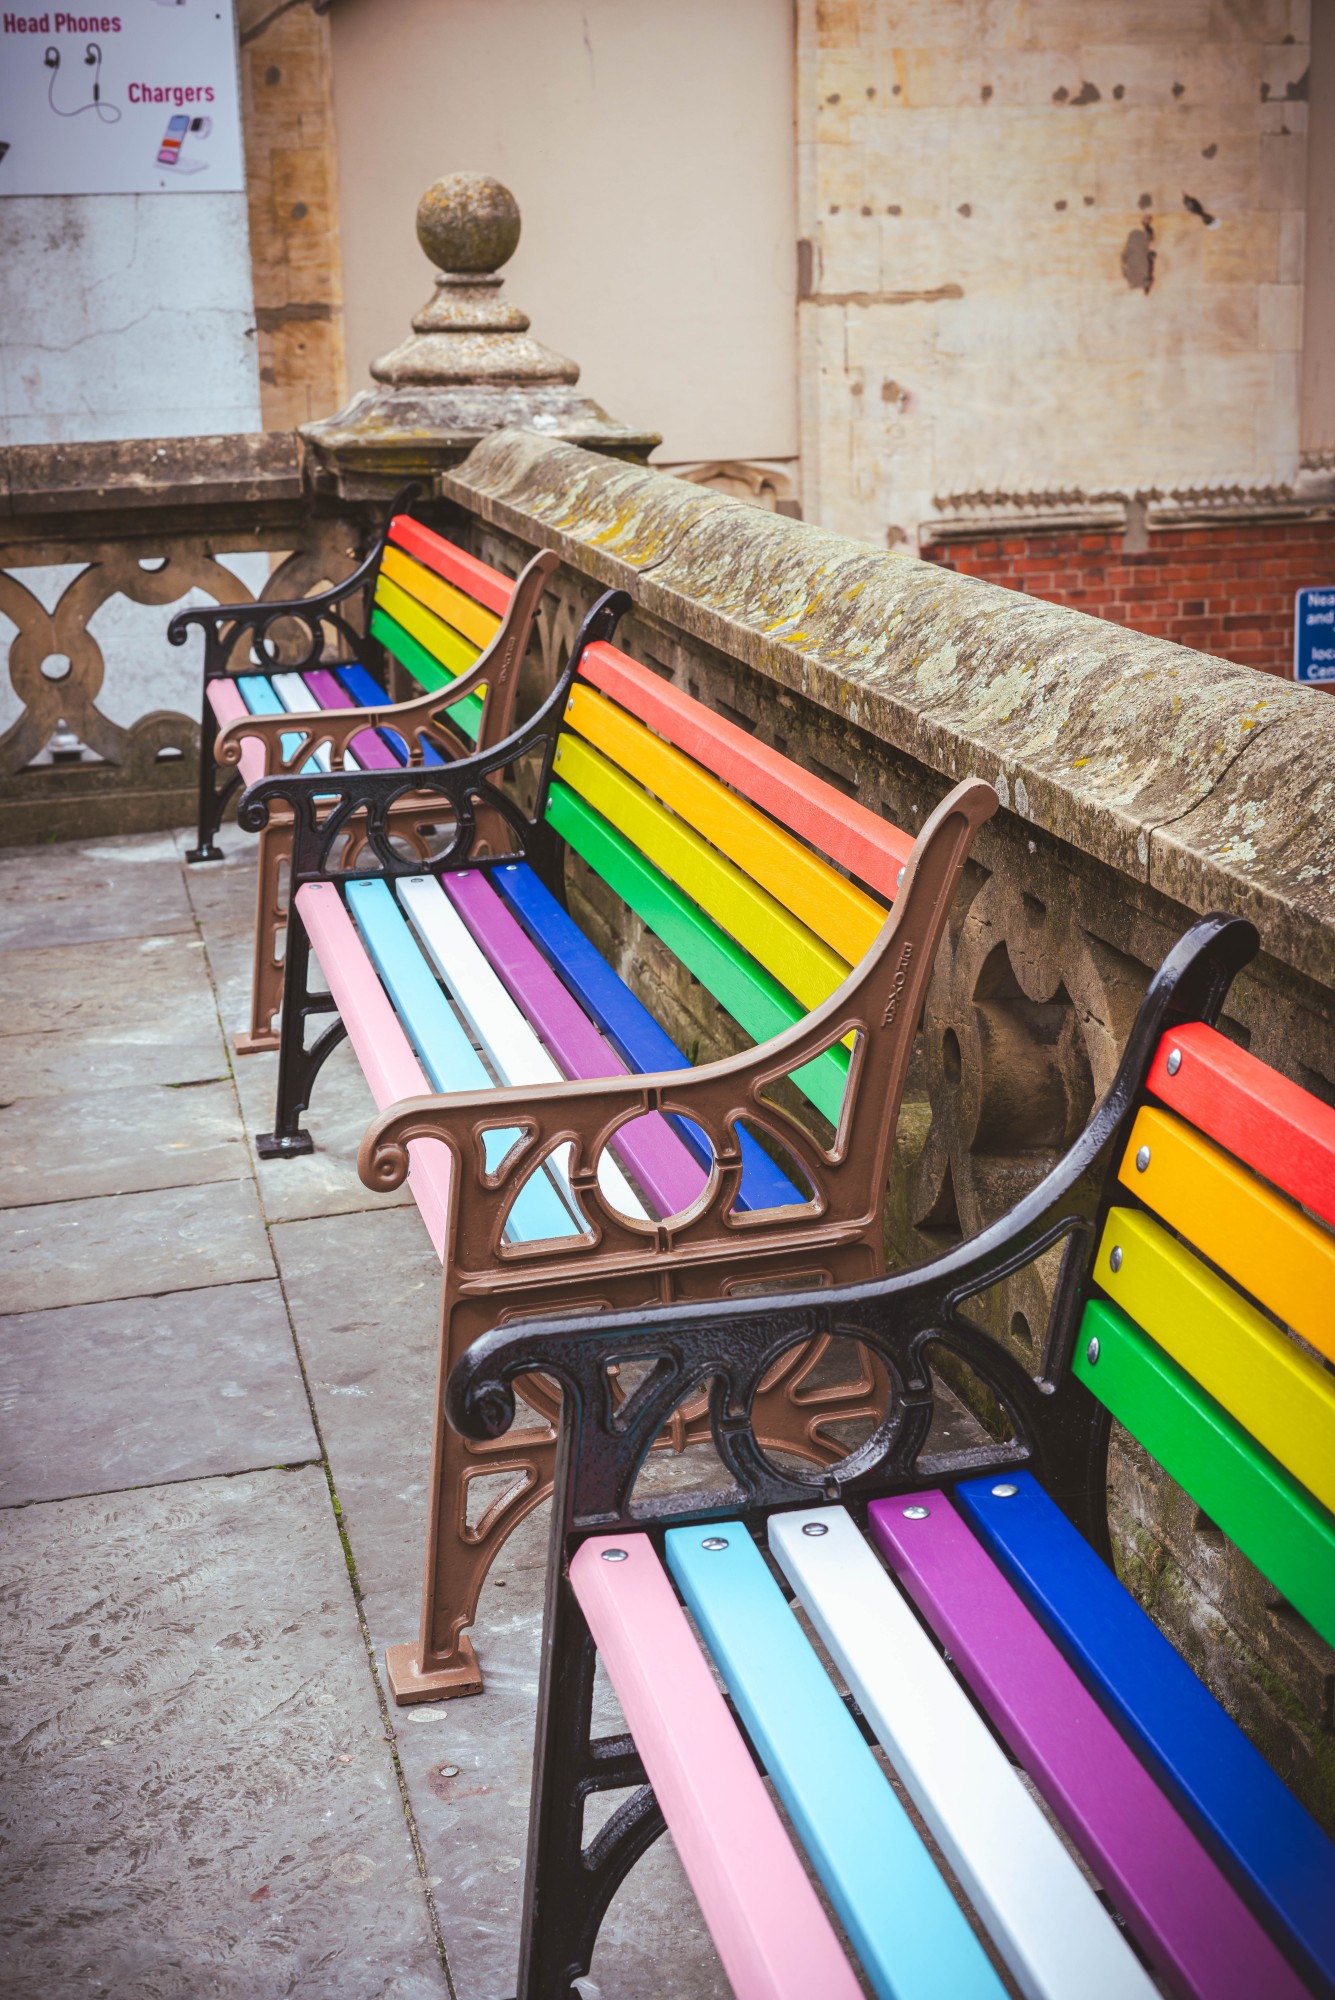 Lincoln Pride announce the unveiling of the striking rainbow benches on High Bridge in Lincoln